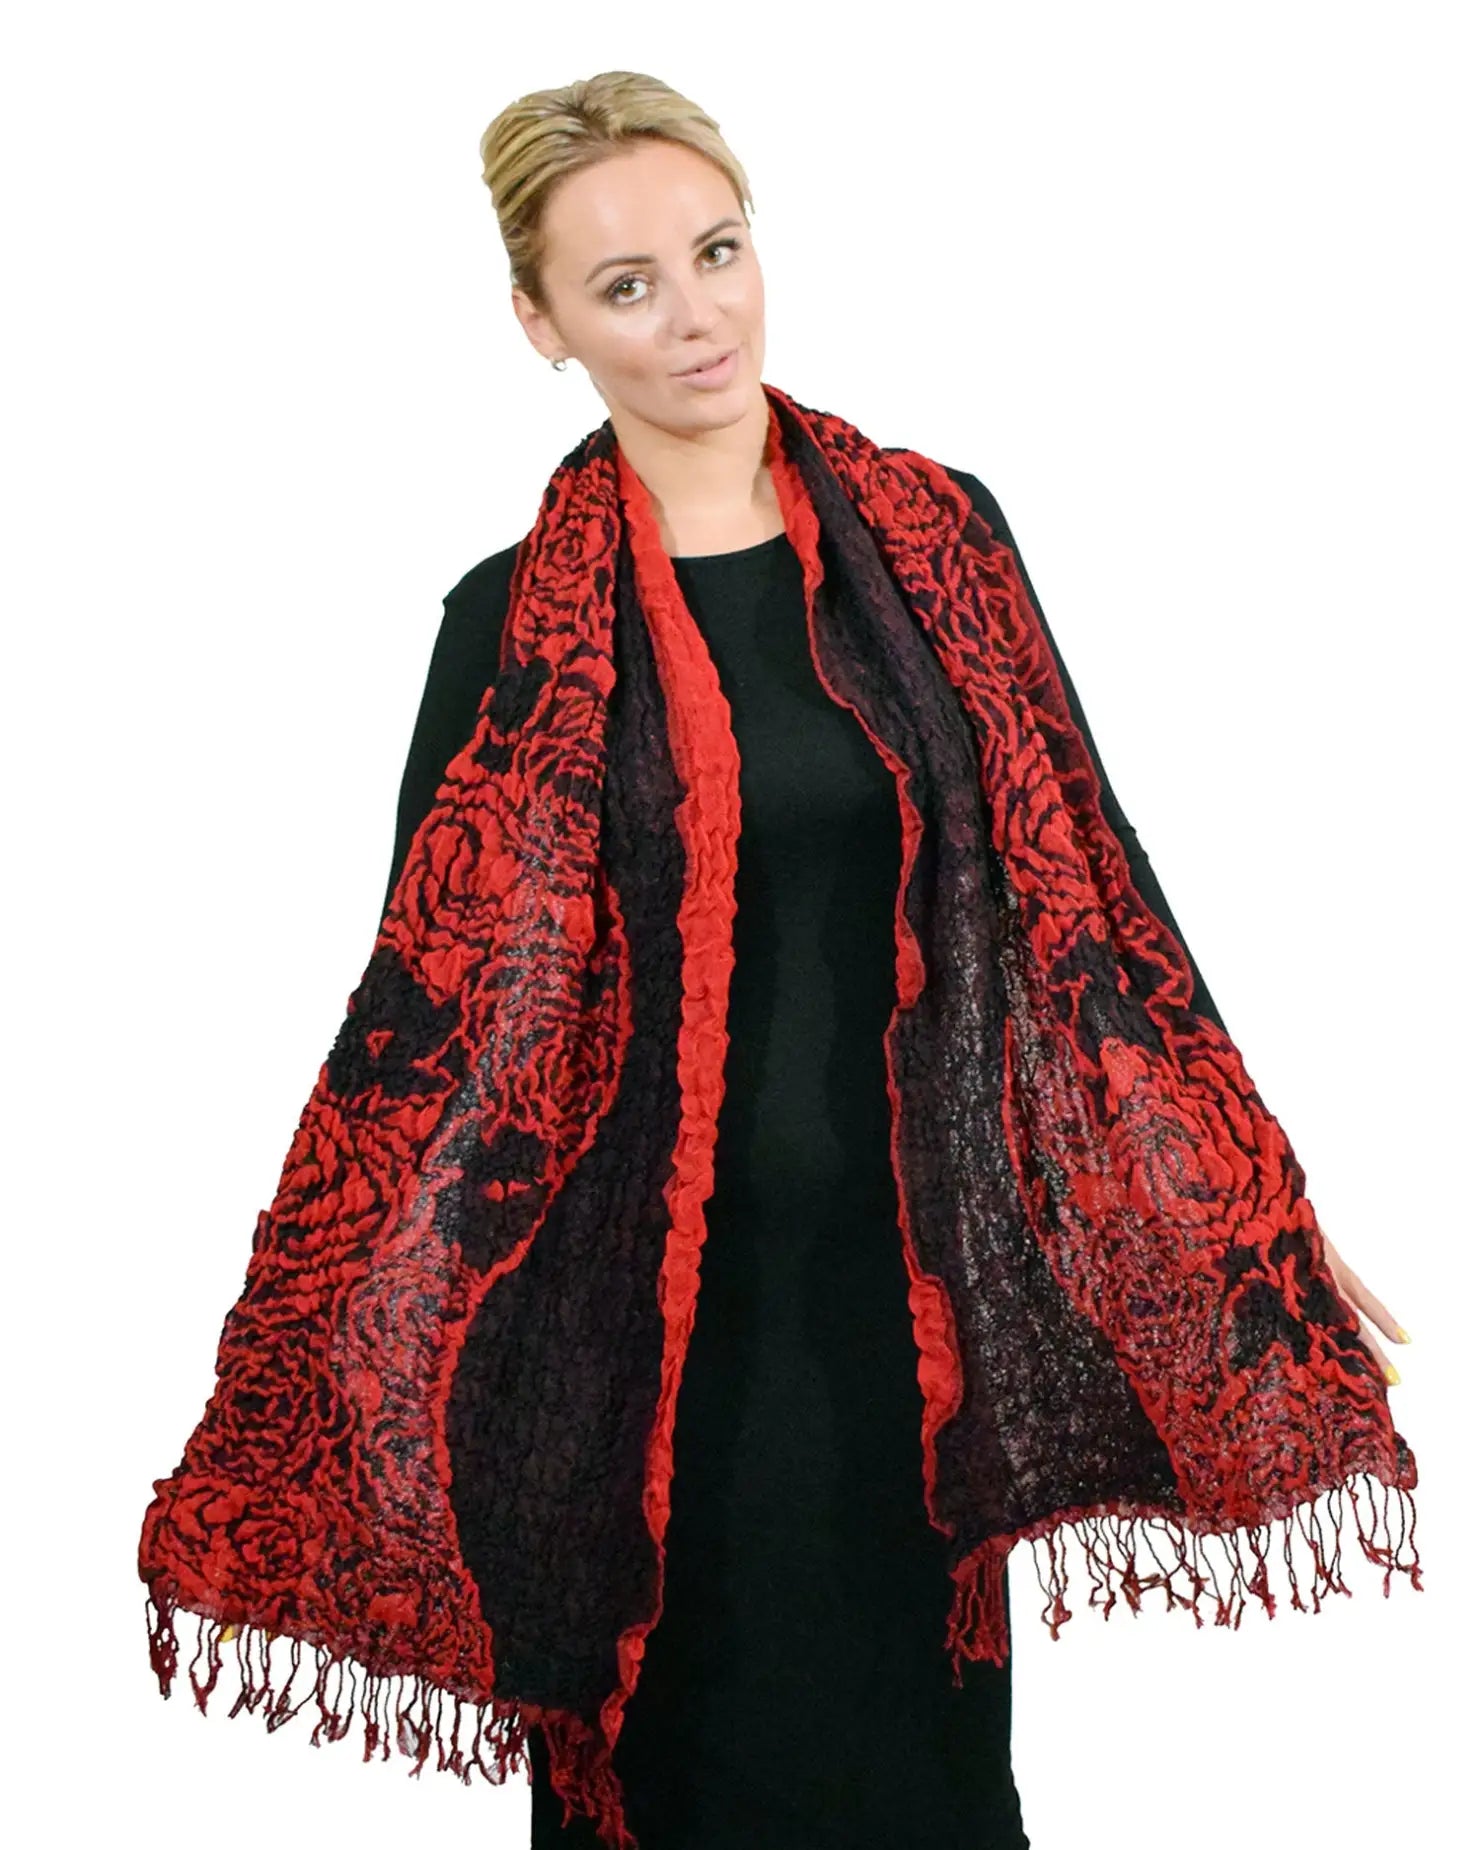 Woman wearing red and black Two Tone Textured Bubble Look Scarf.